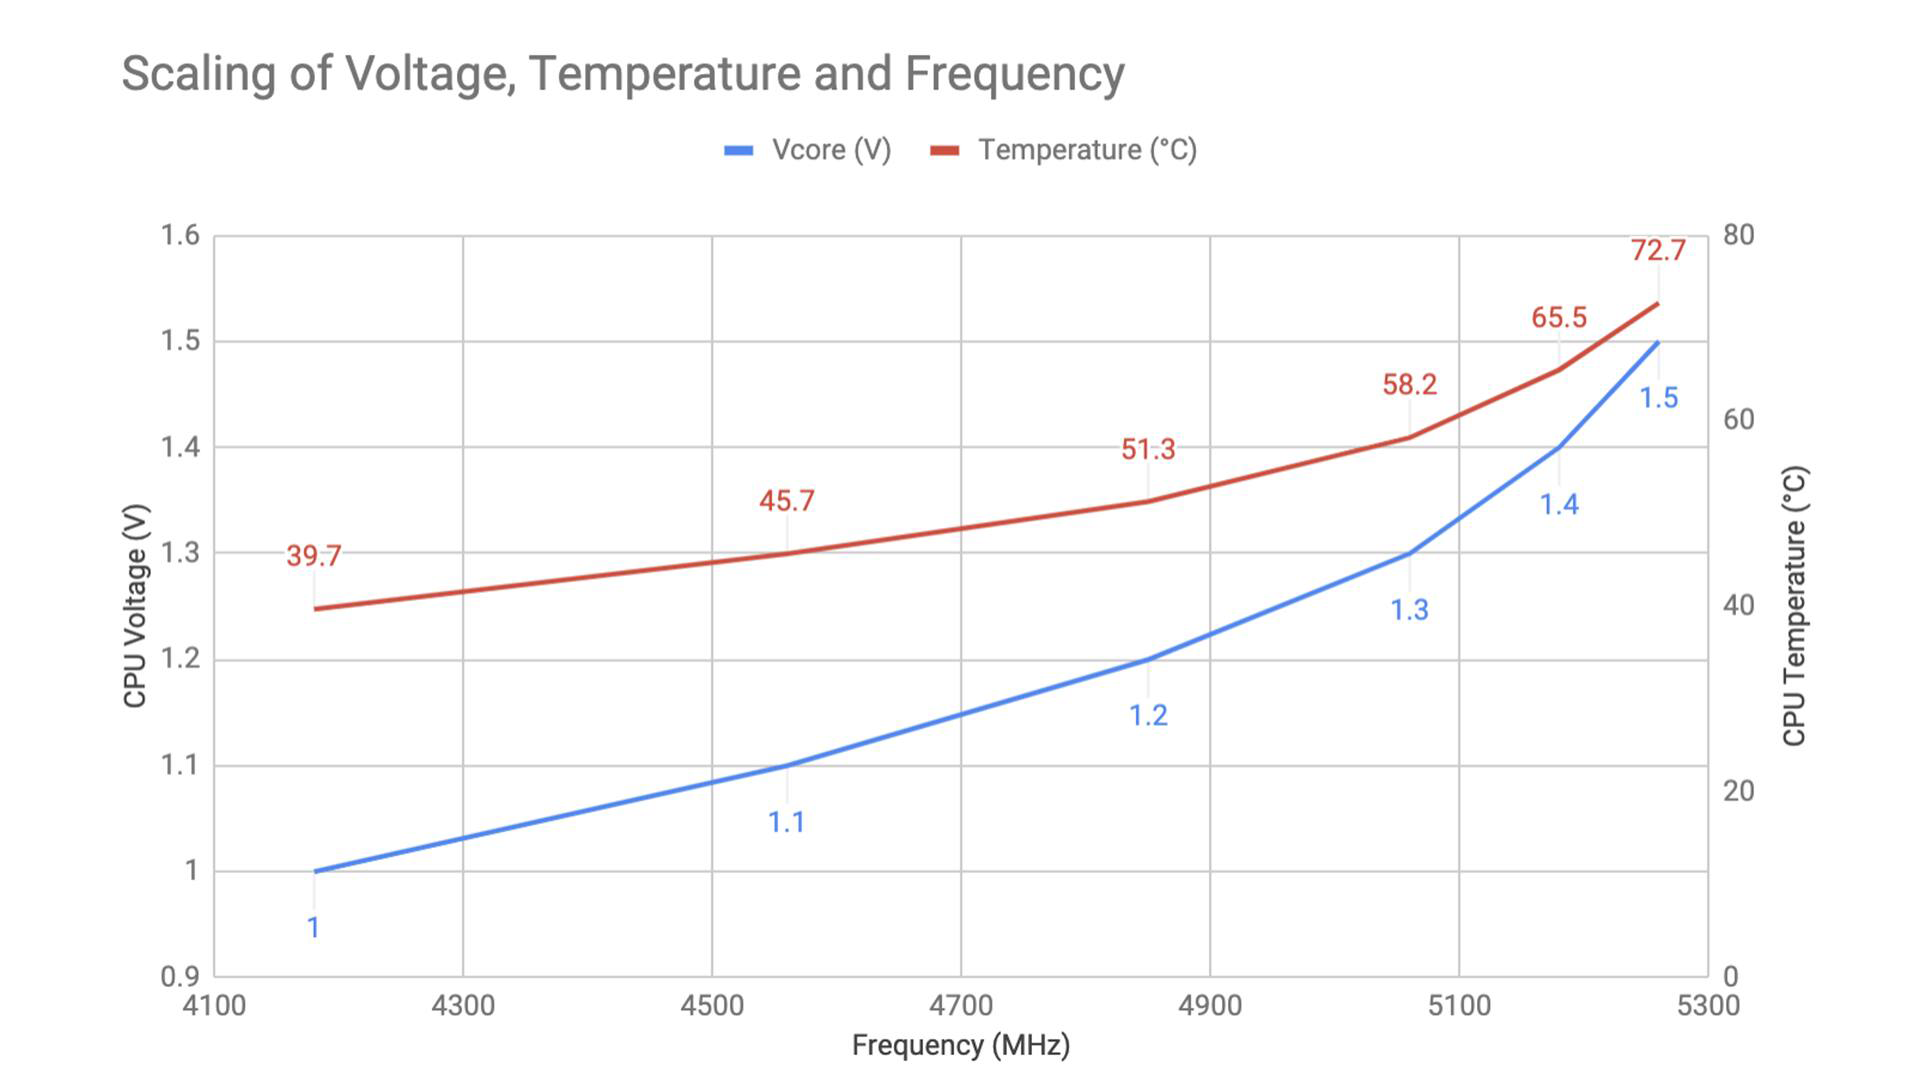 voltage-temperature-frequency-scaling-rwd.png.rendition.intel.web.1920.1080.png